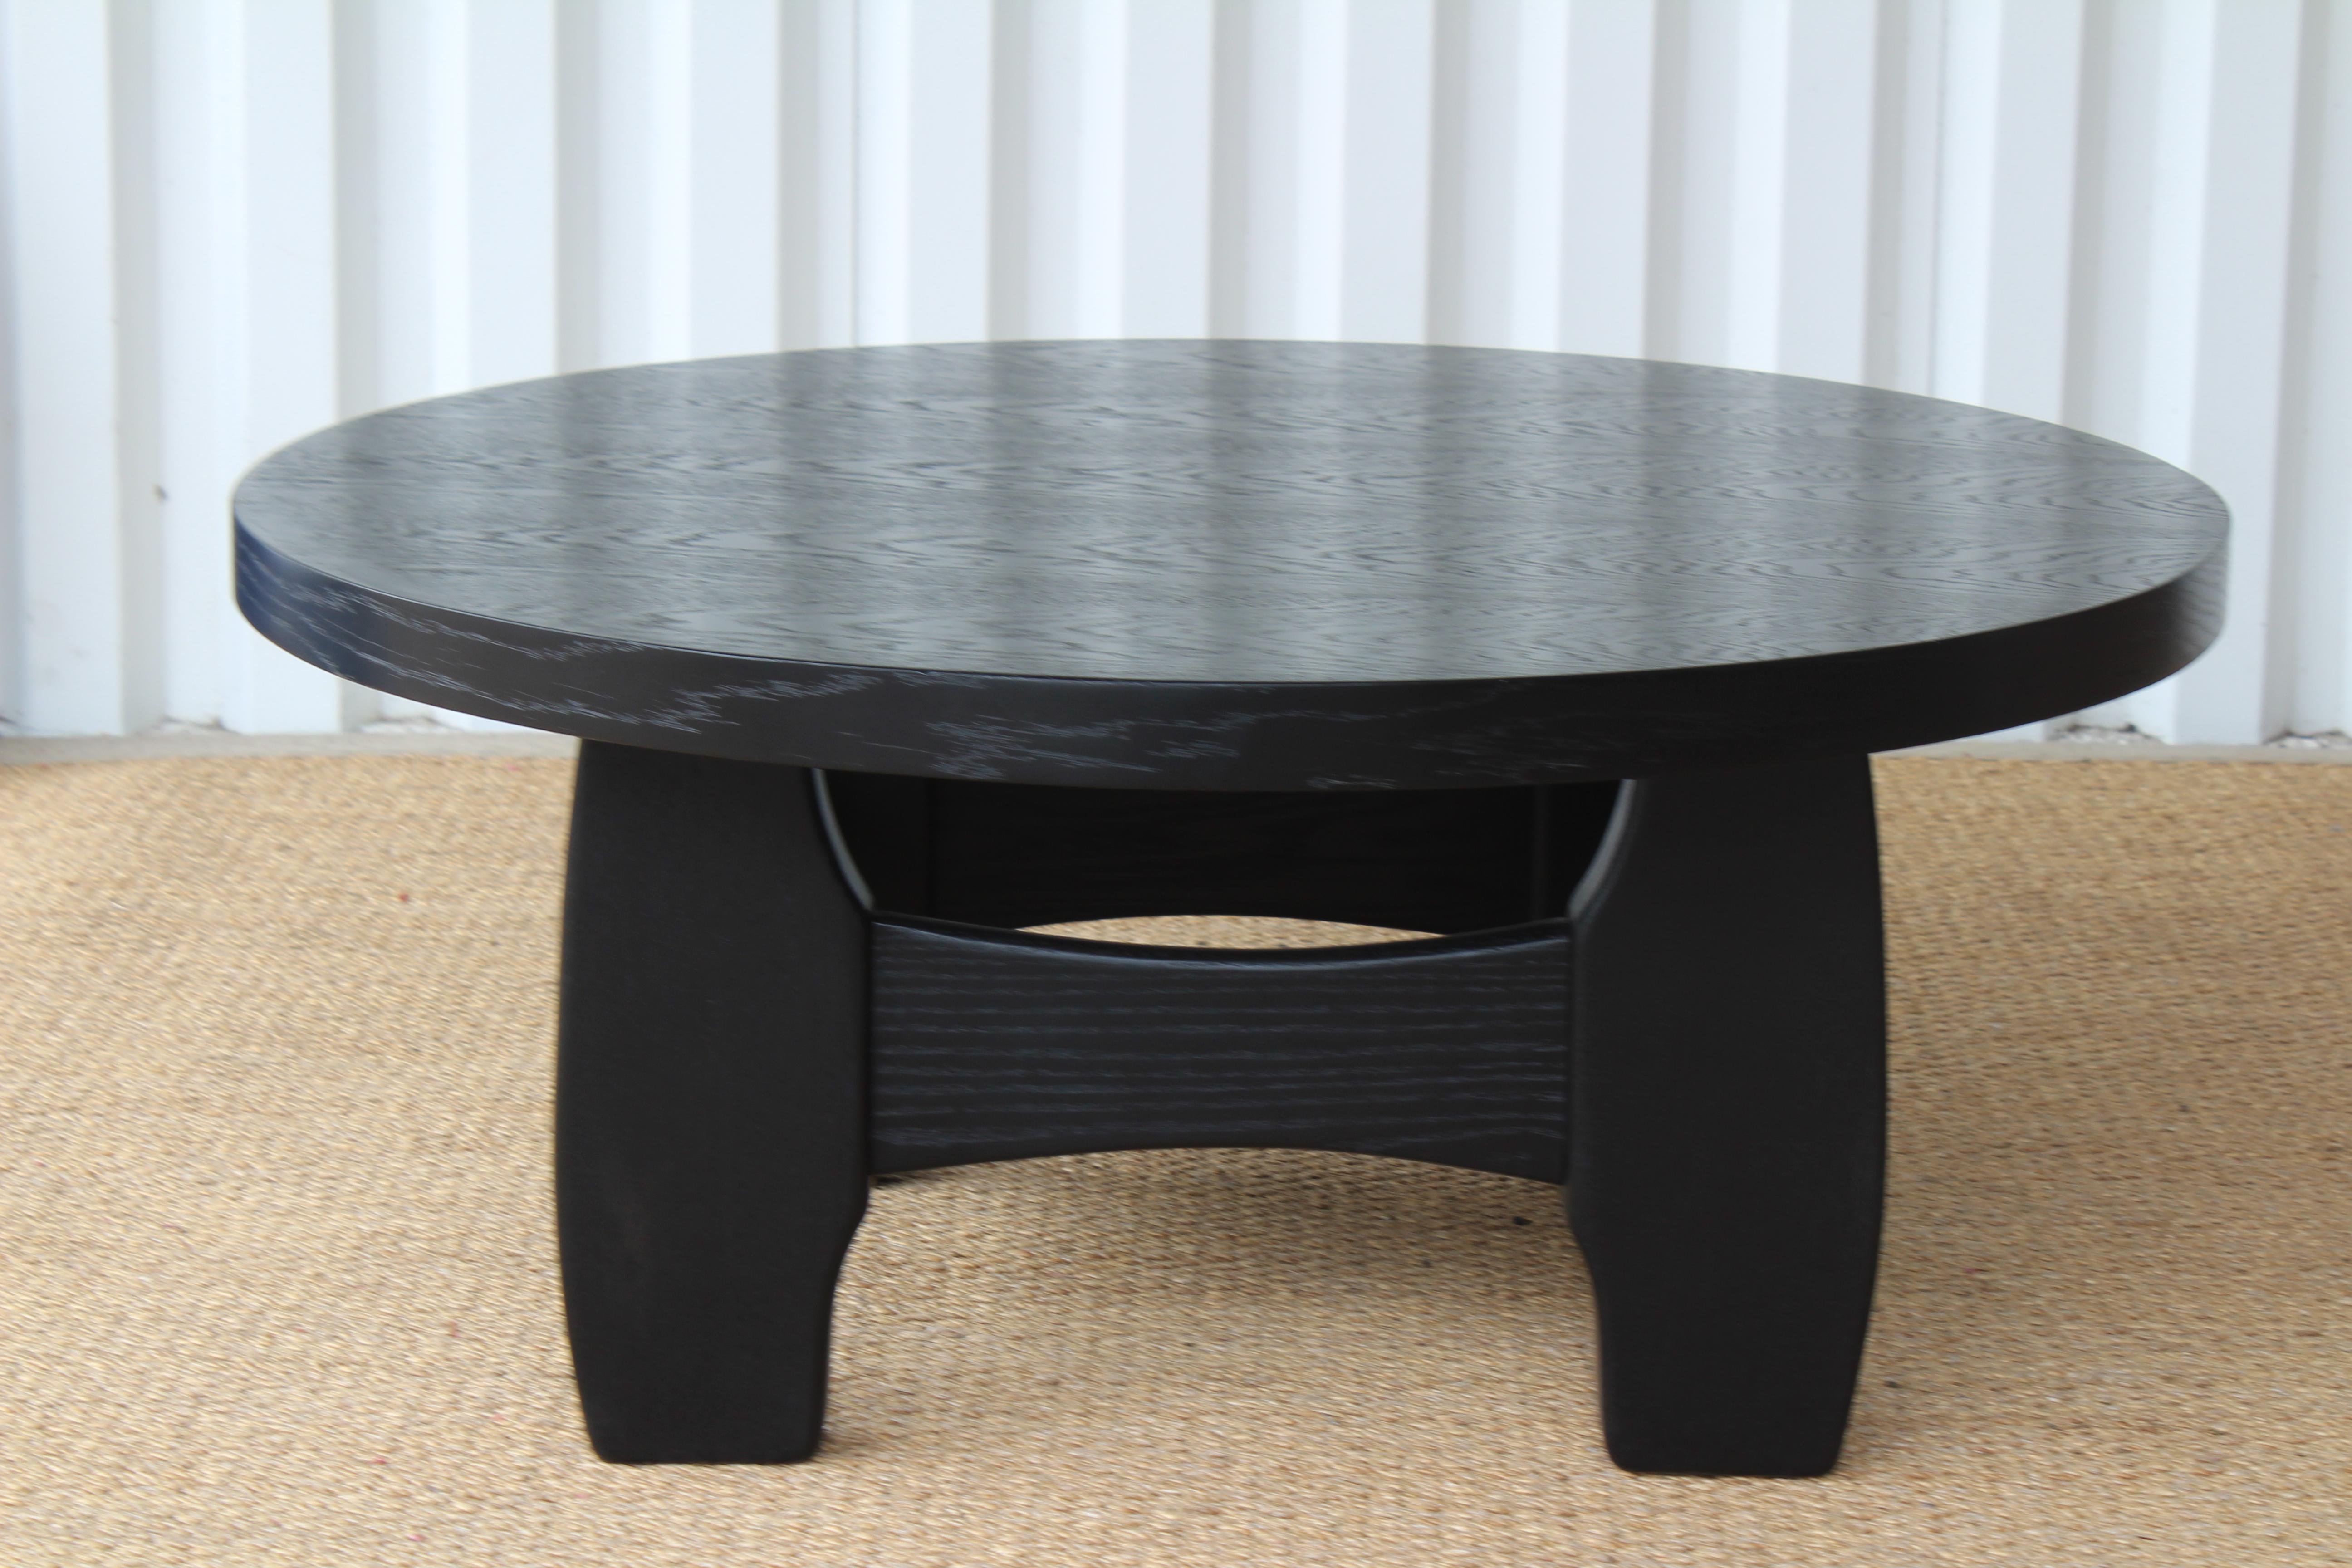 Vintage 1970s oak coffee table, recently restored in an ebonized finish. In excellent condition.